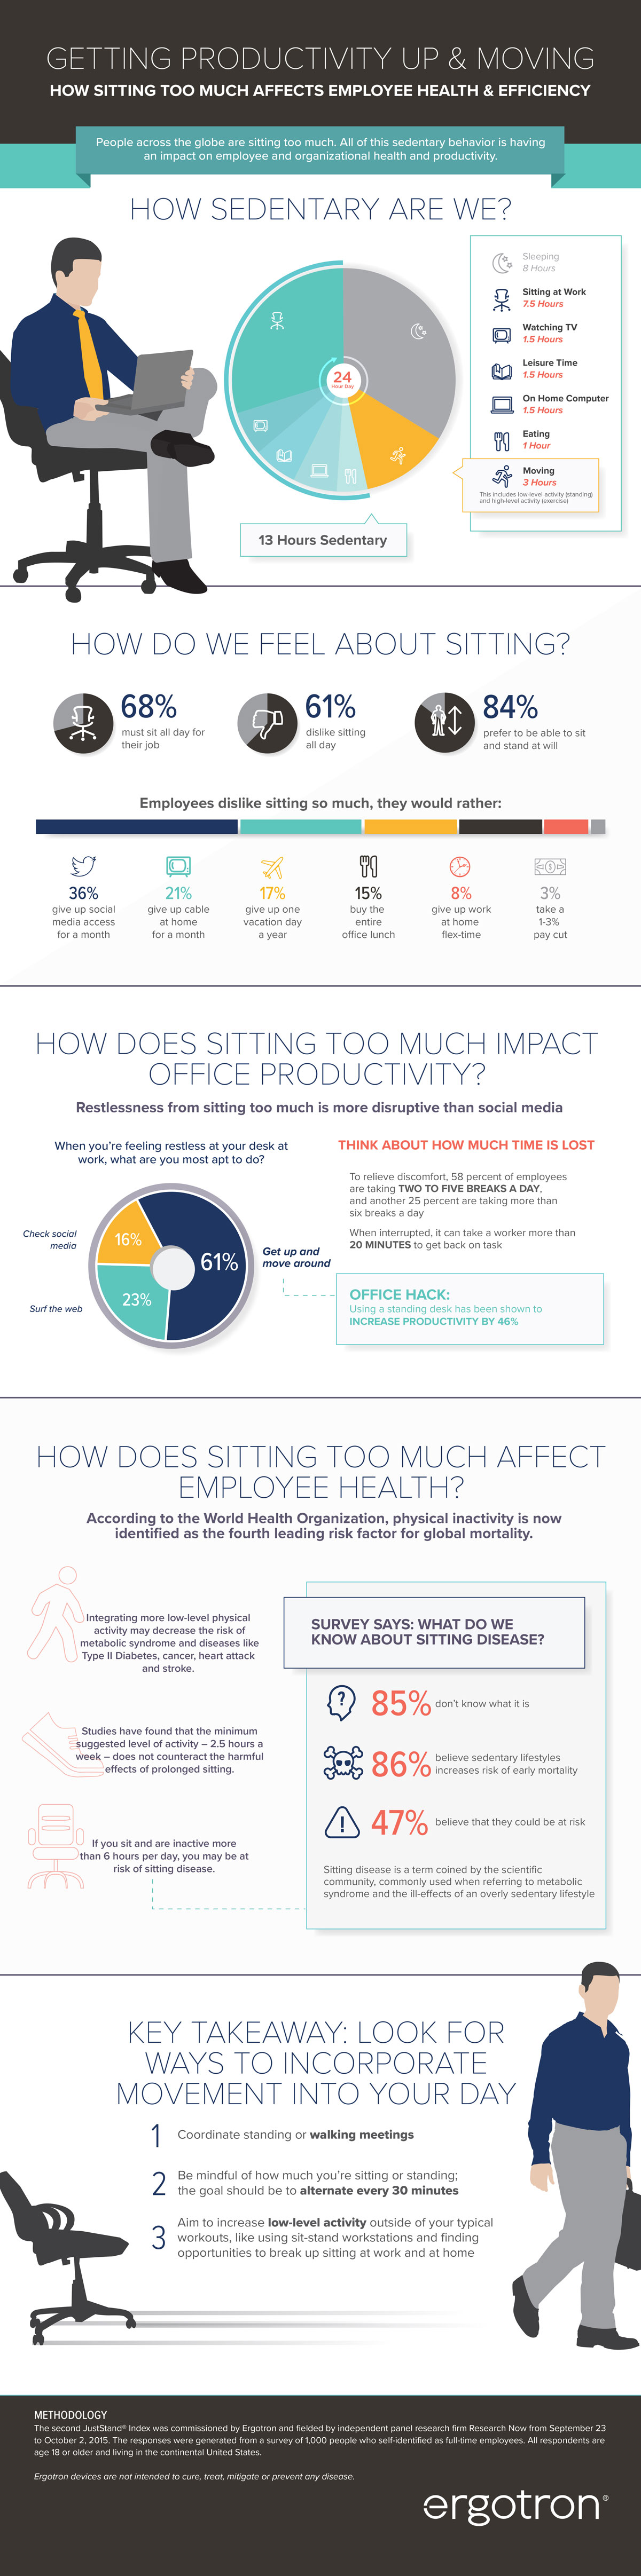 Getting Productivity Up & Moving infographic